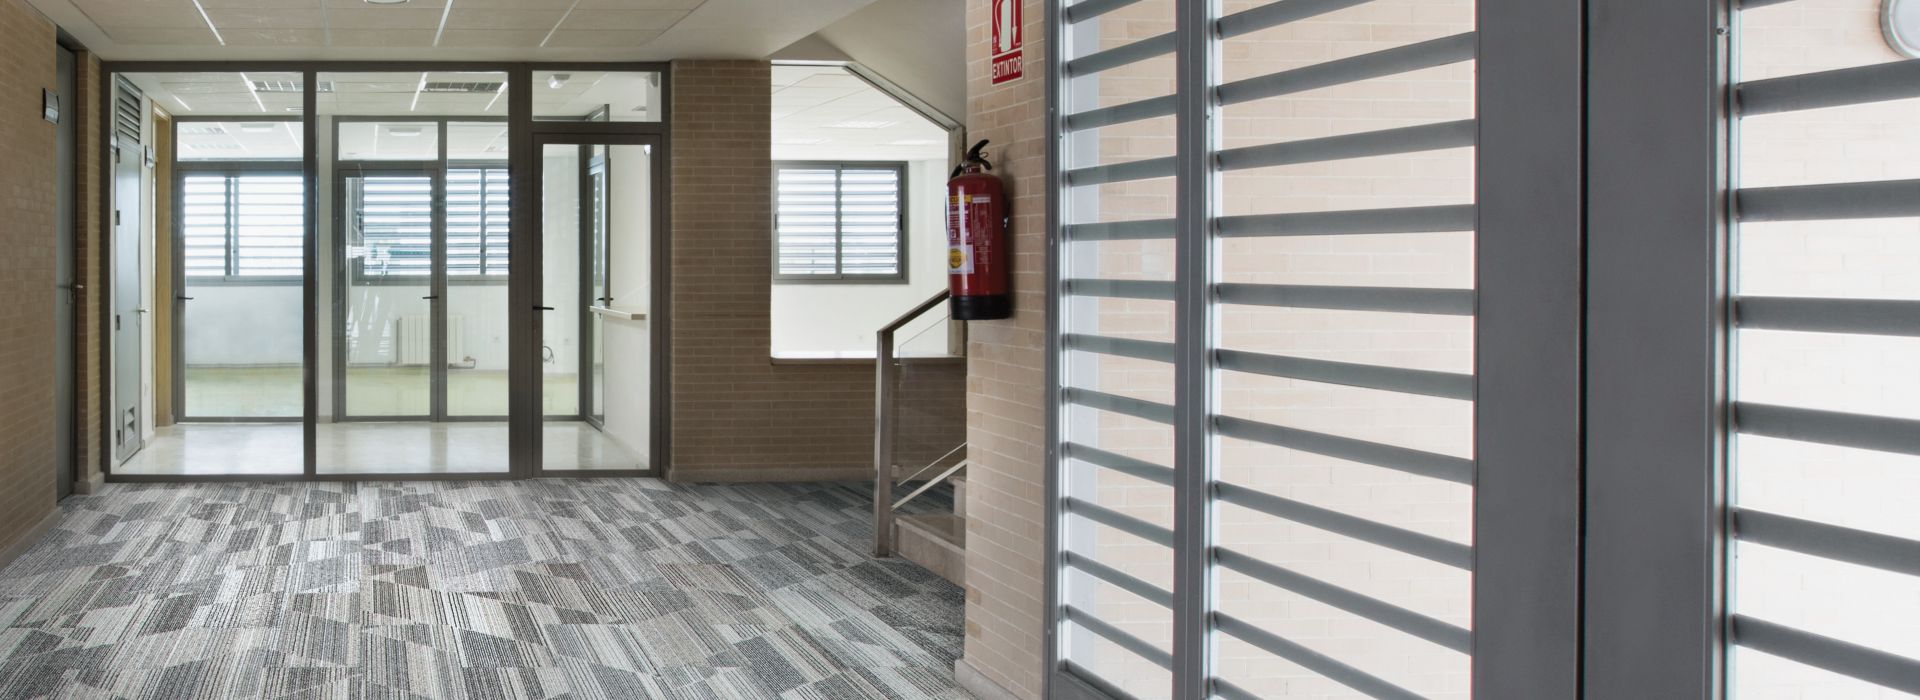 Interface Driftwood plank carpet tile in open area of corridor image number 1